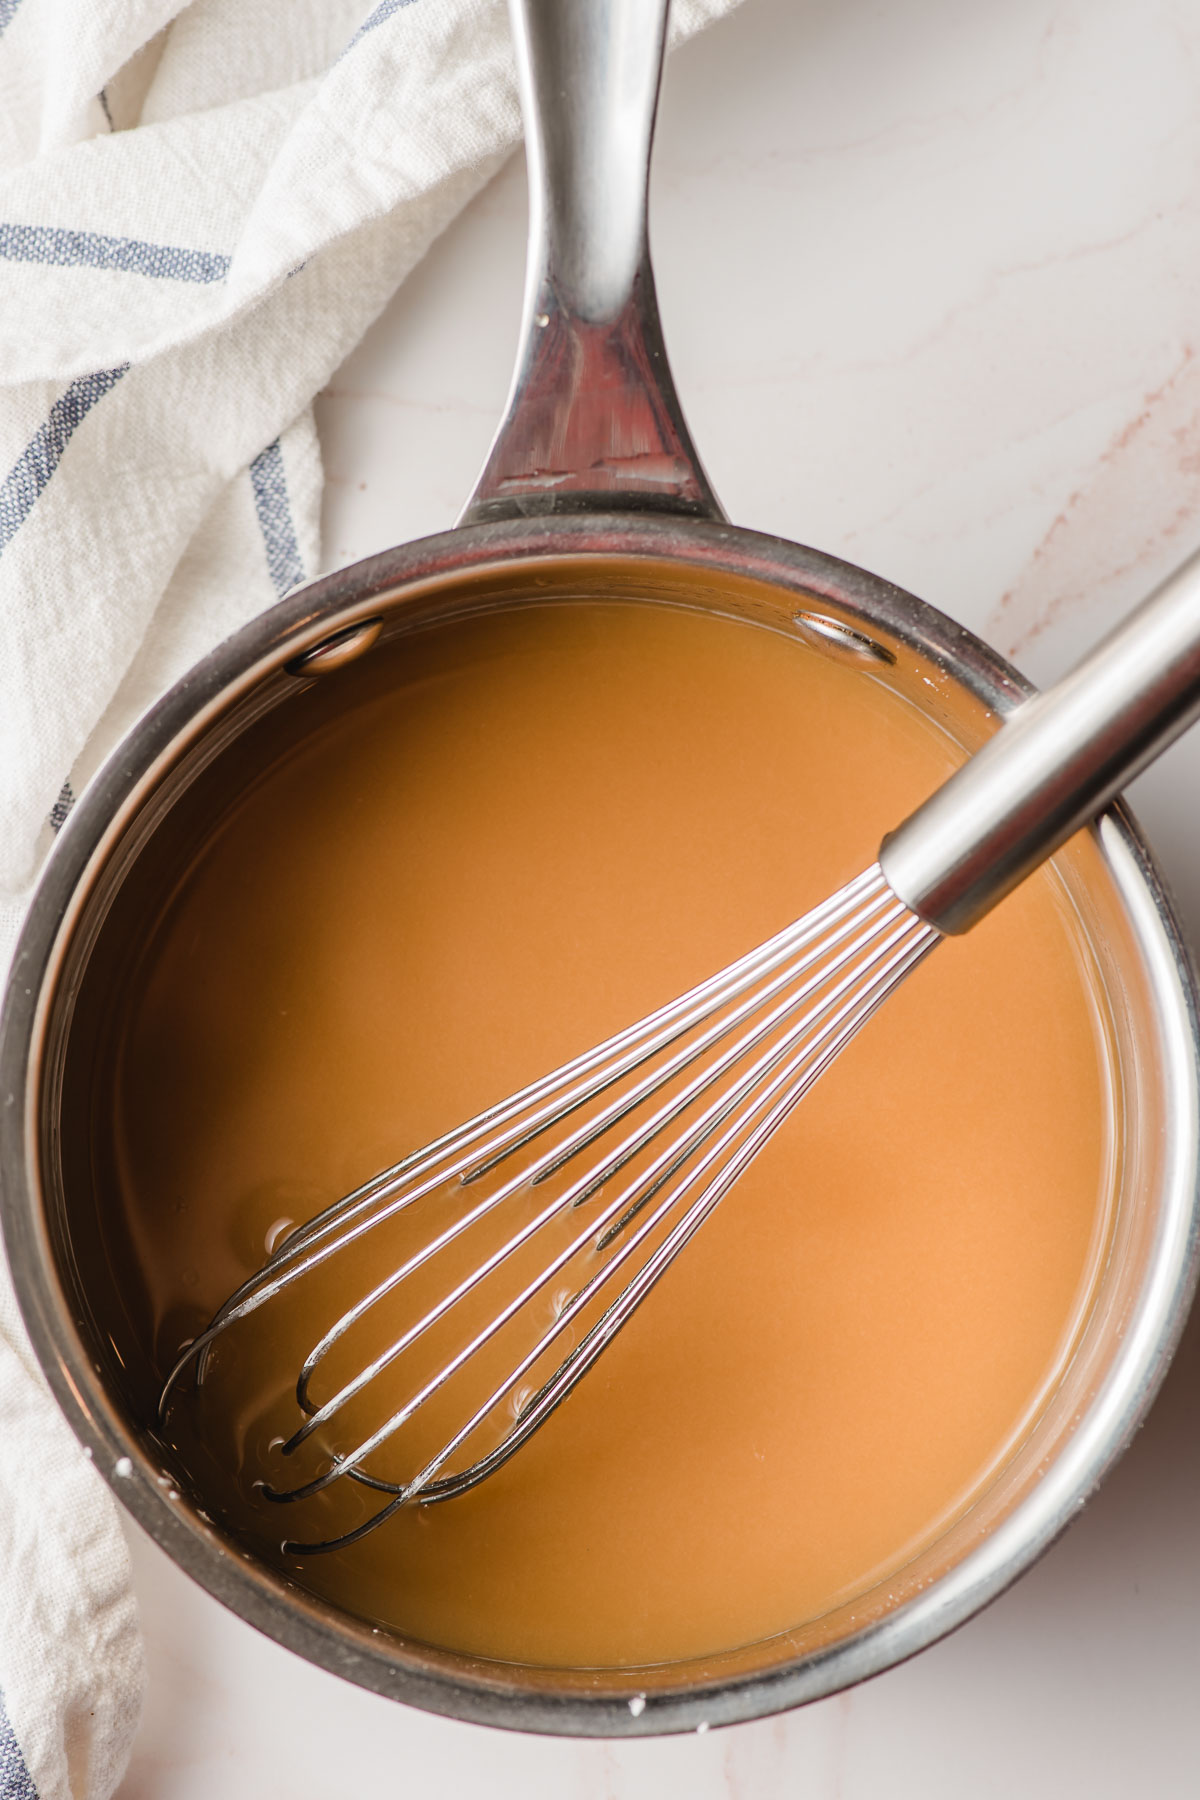 Apple cider, cornstarch, and brown suagr in a saucepan with a whisk.